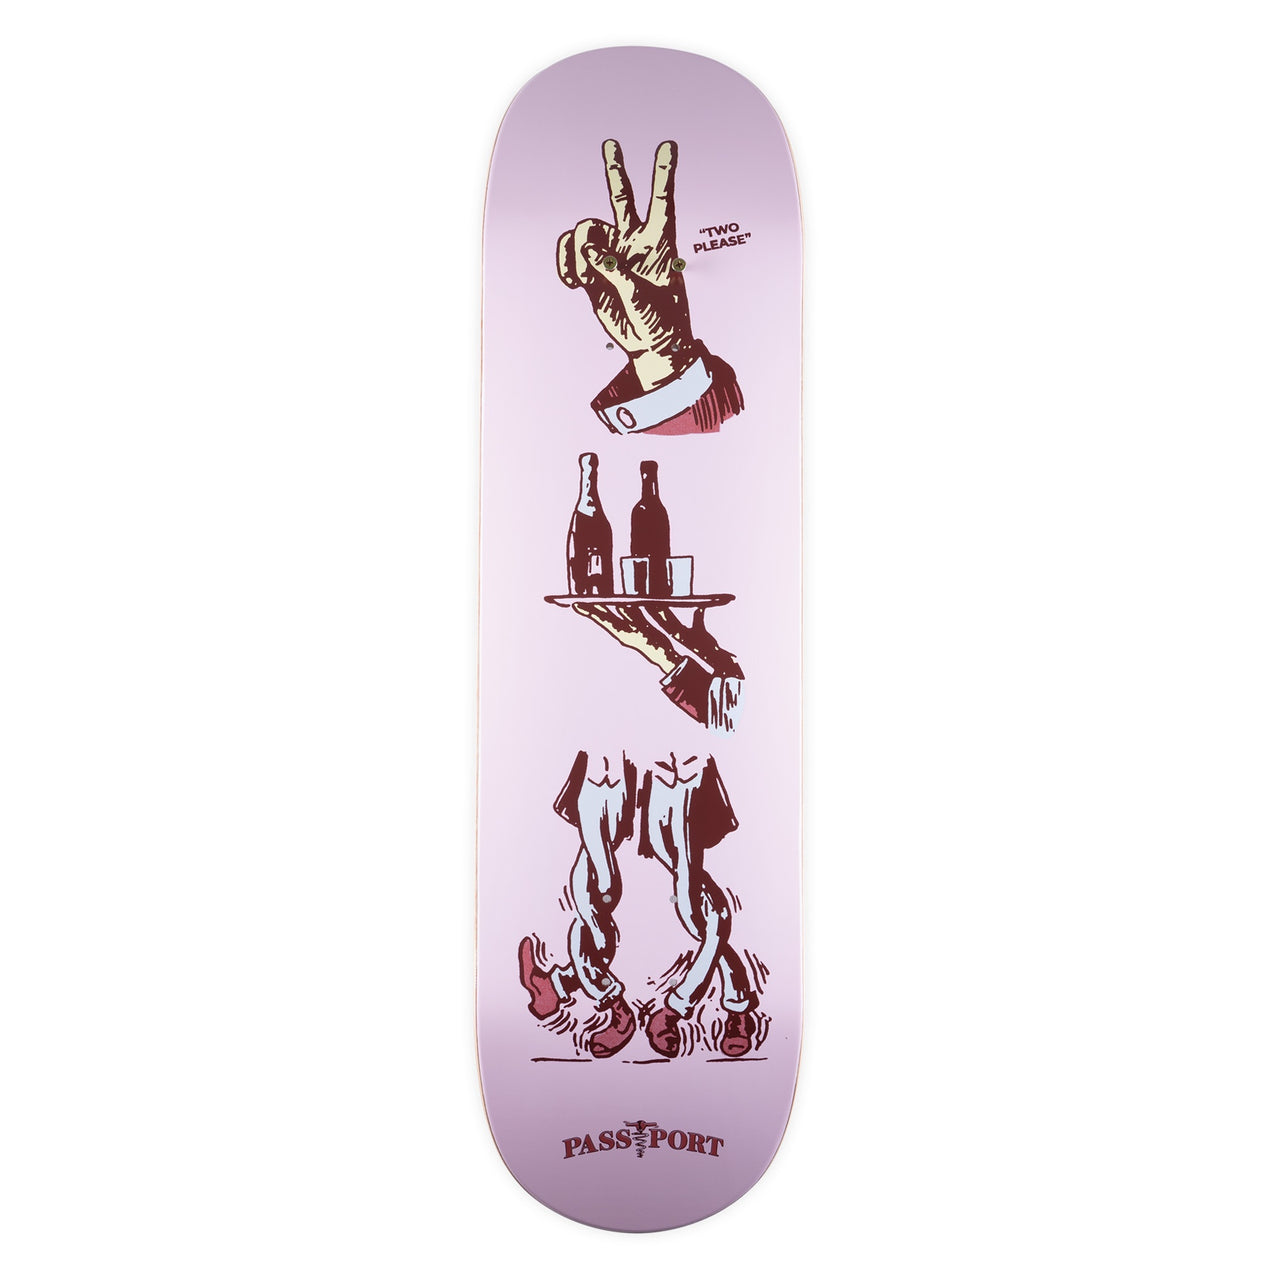 PASS~PORT - "SPIN ME ROUND" TWO PLEASE SKATEBOARD DECK - 8.125